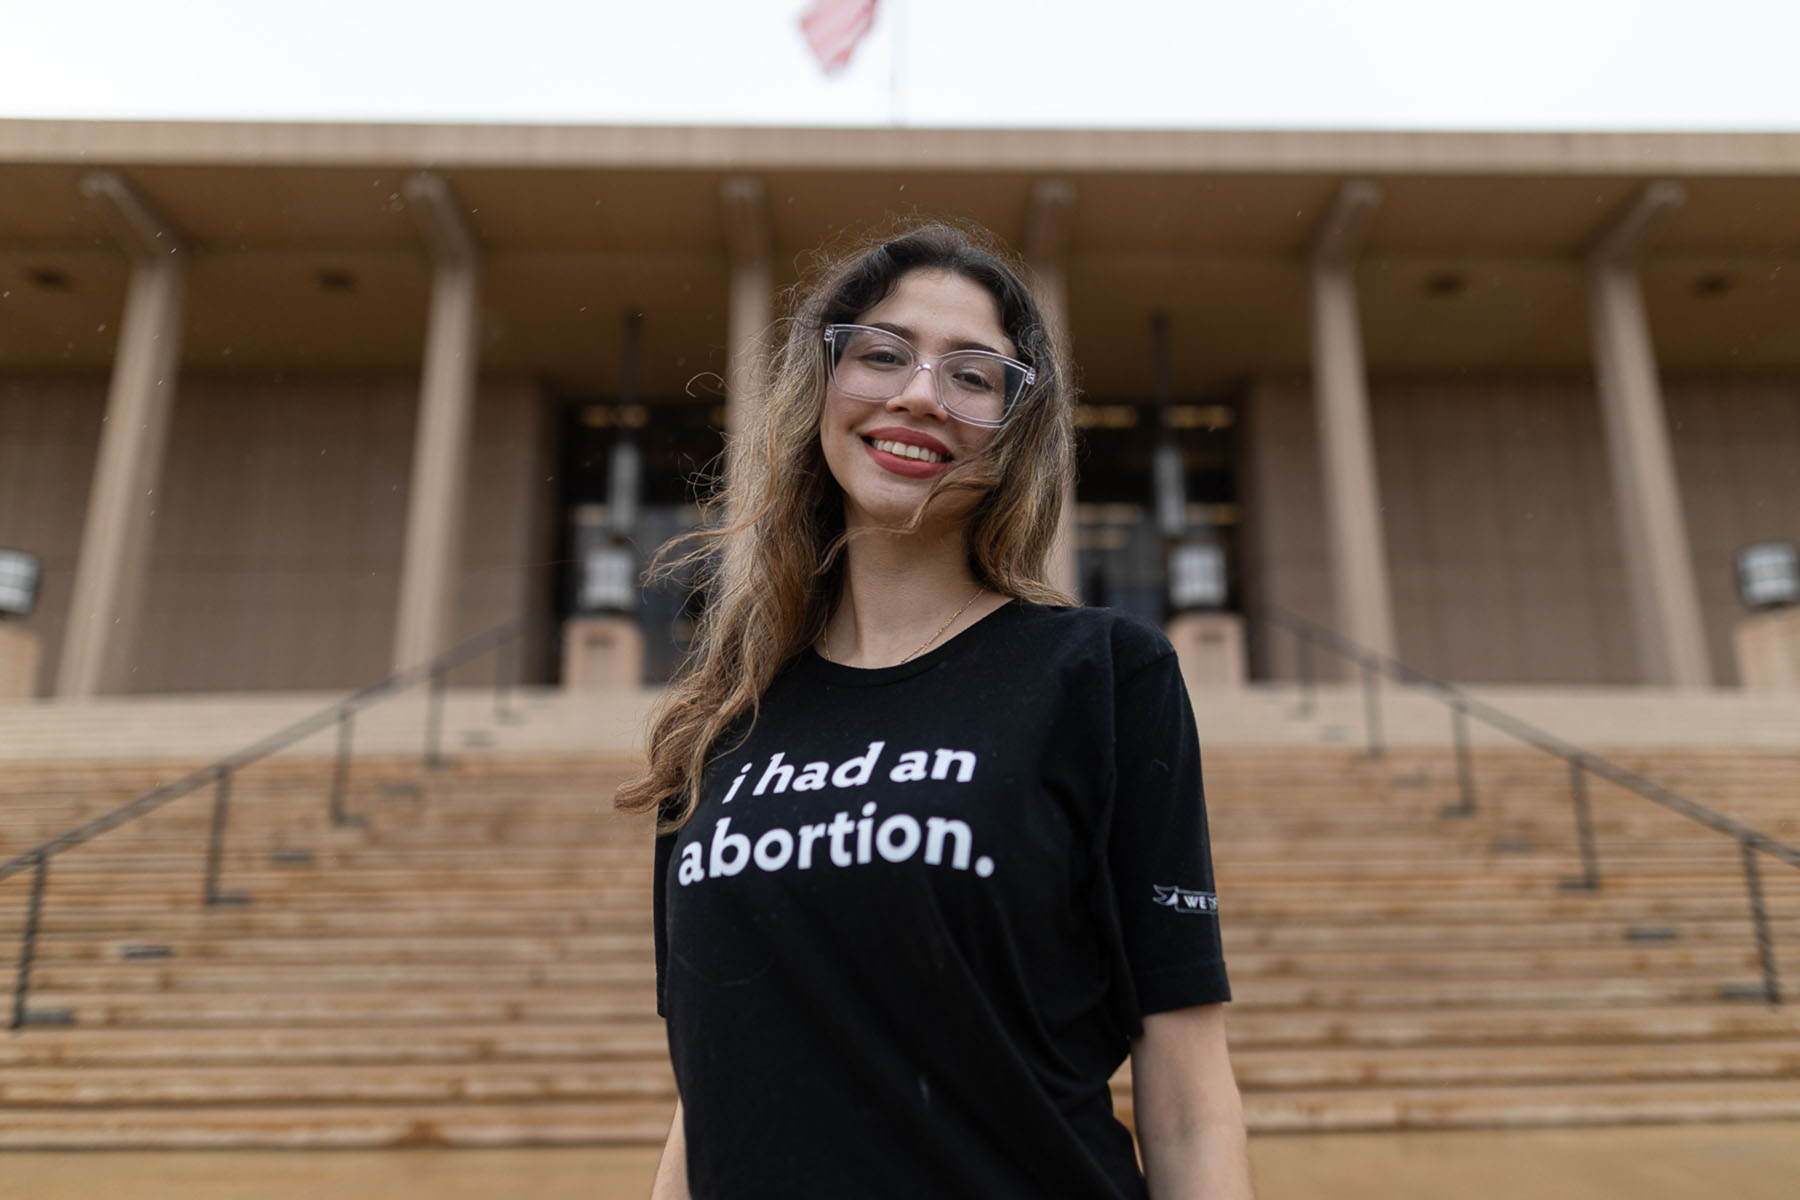 A person with long ashy blonde hair, glasses, wearing burnt orange lipstick and a black shirt that reads "I had an abortion," stands in front of a large building with a staircase.